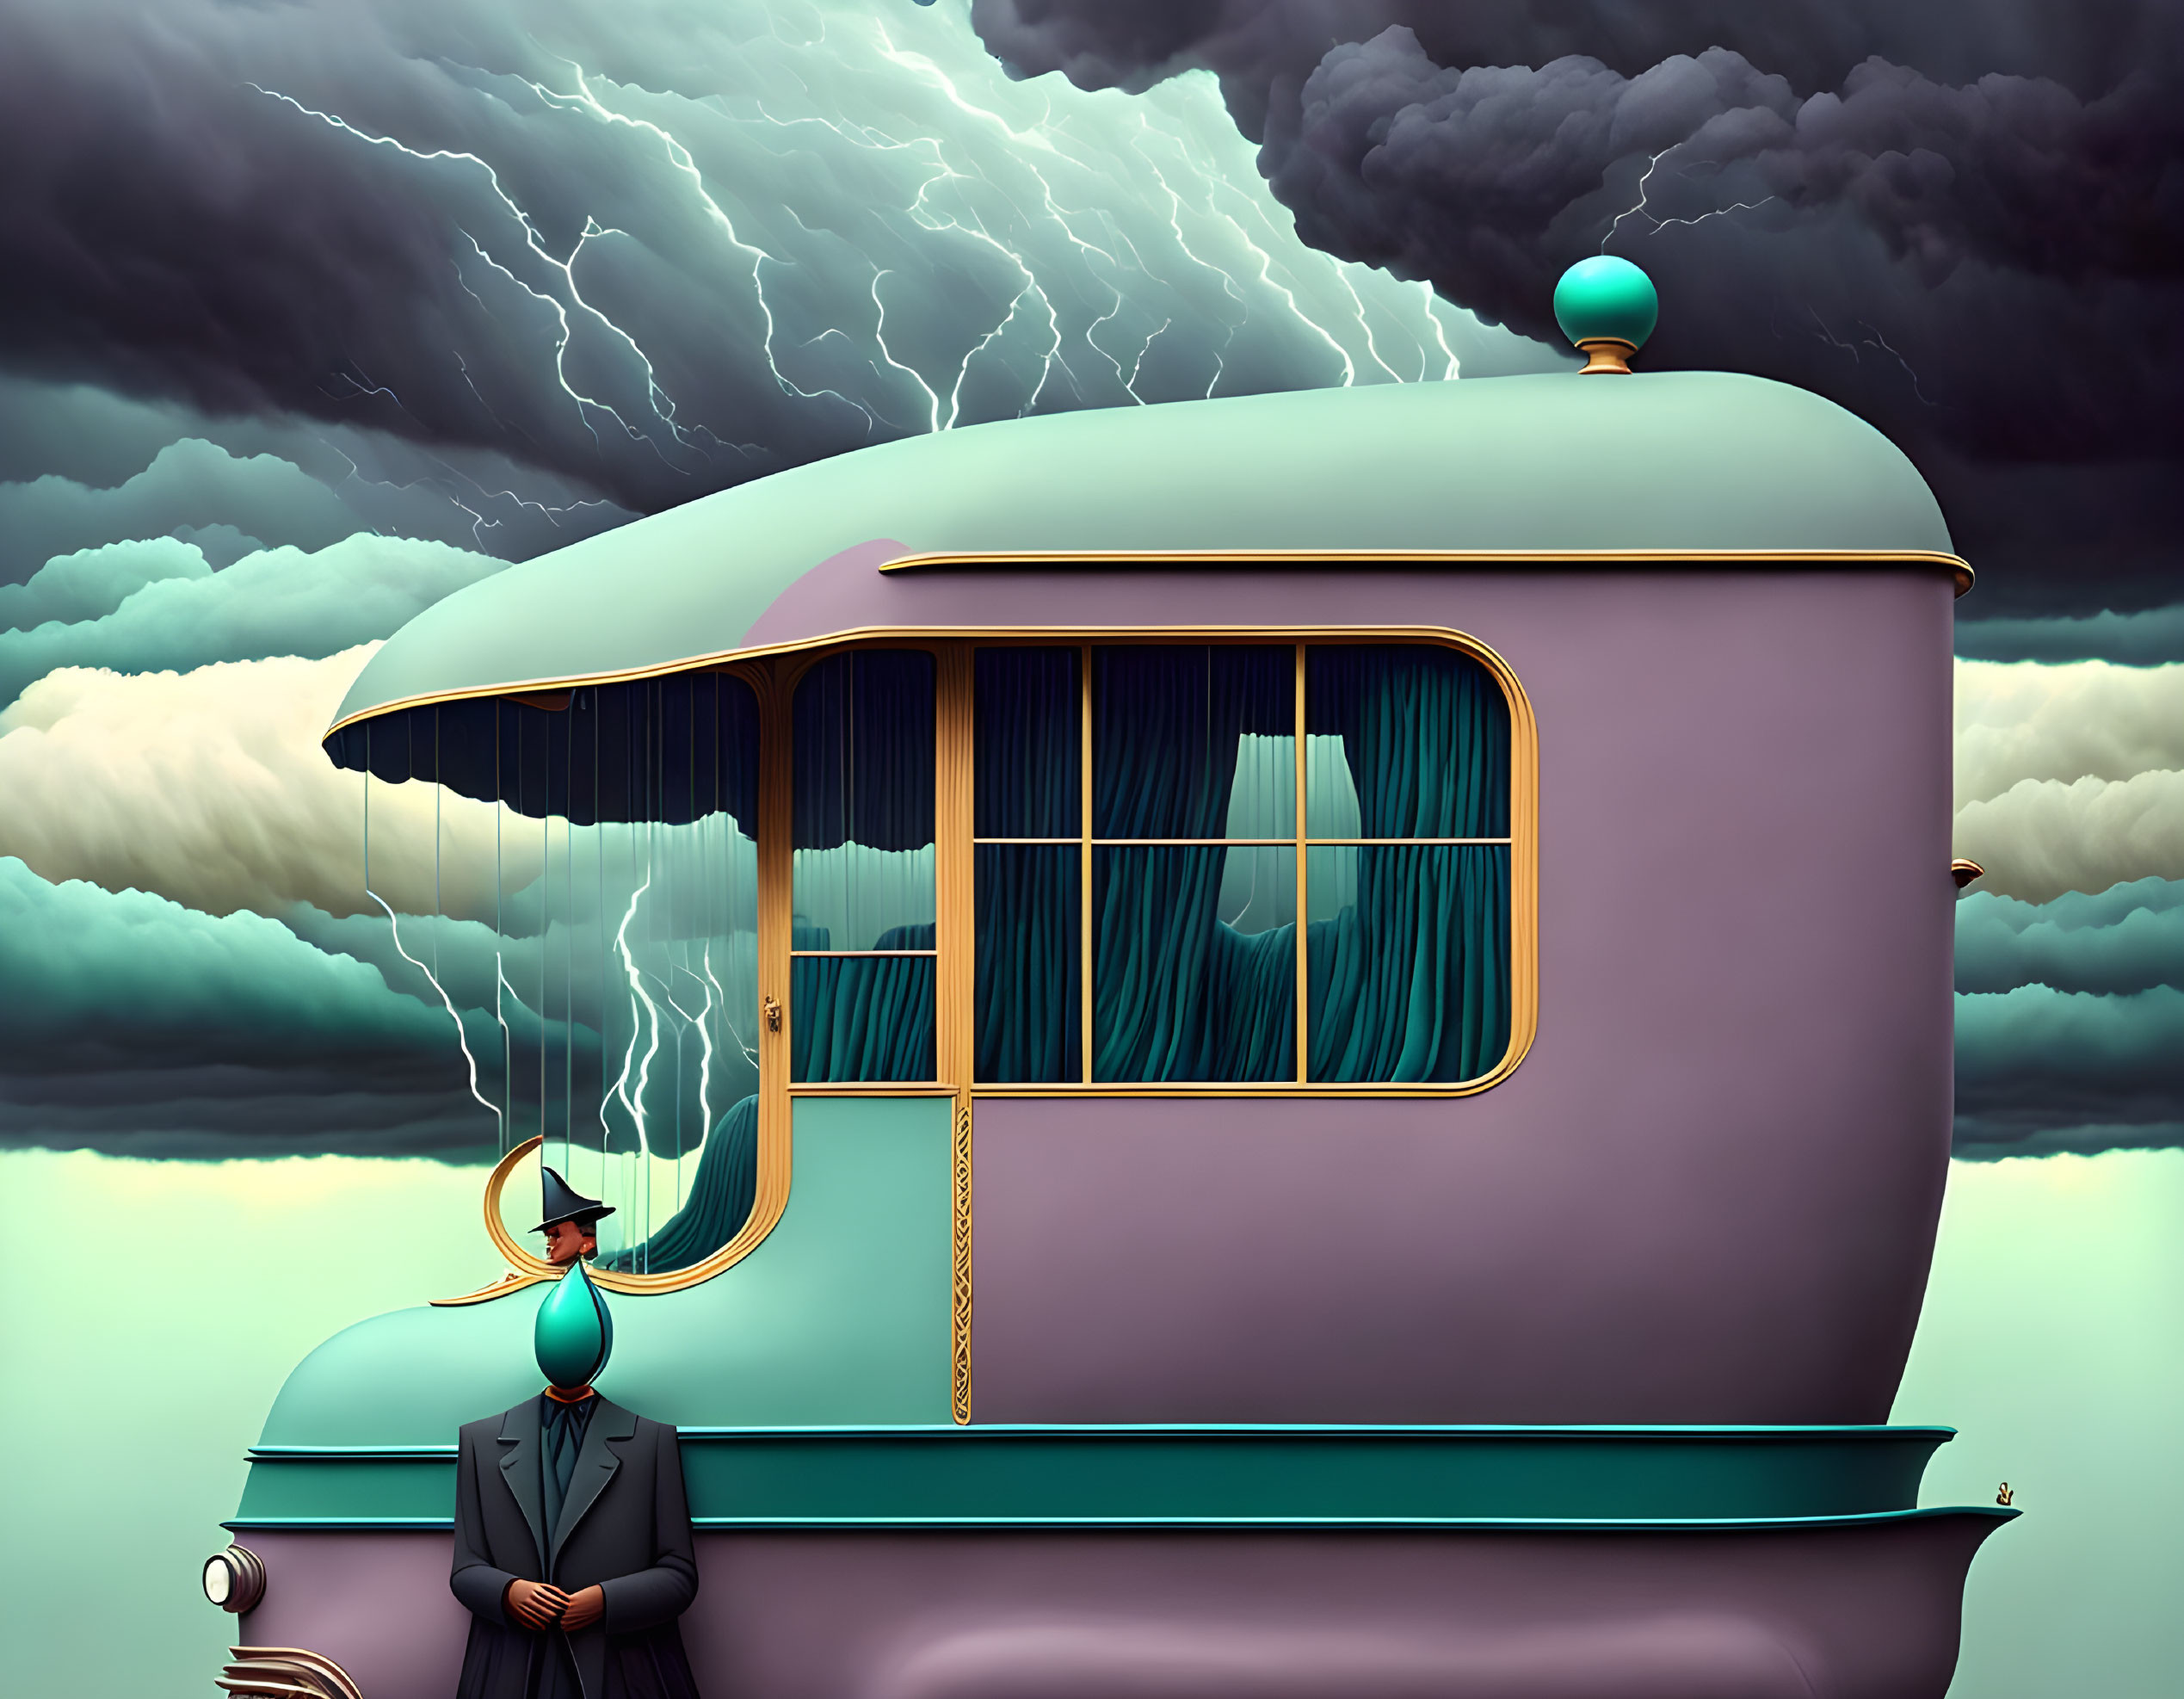 Surrealistic Vehicle in Storm